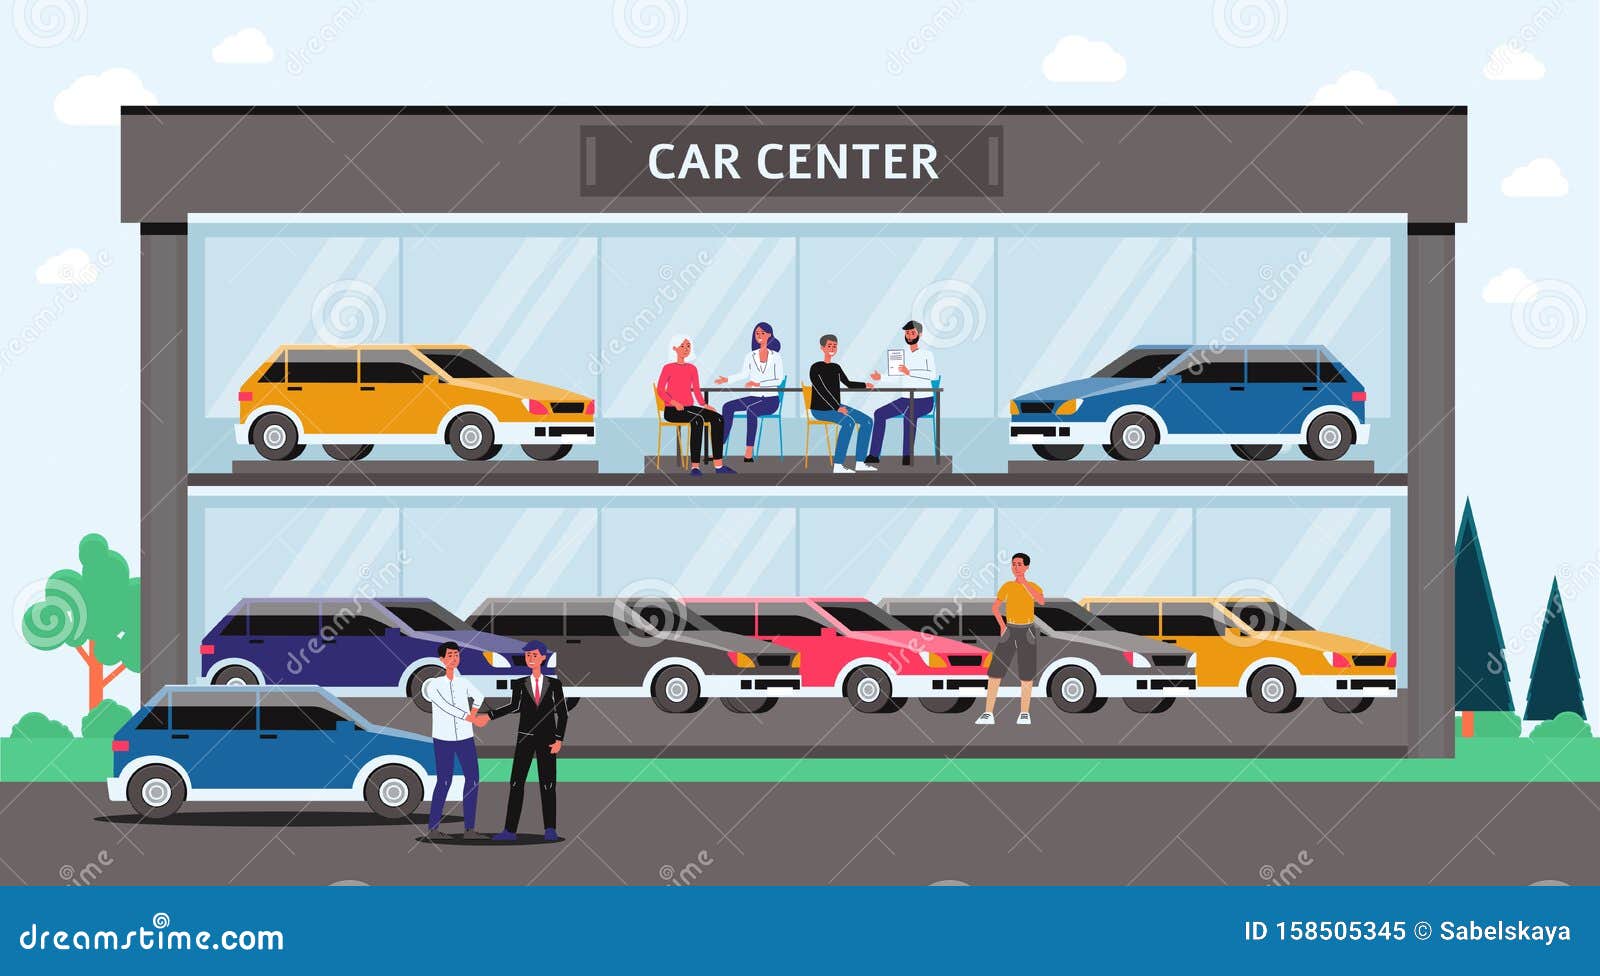 Car Center - Cartoon Glass Building with Colorful Cars and People Inside.  Stock Vector - Illustration of colorful, people: 158505345